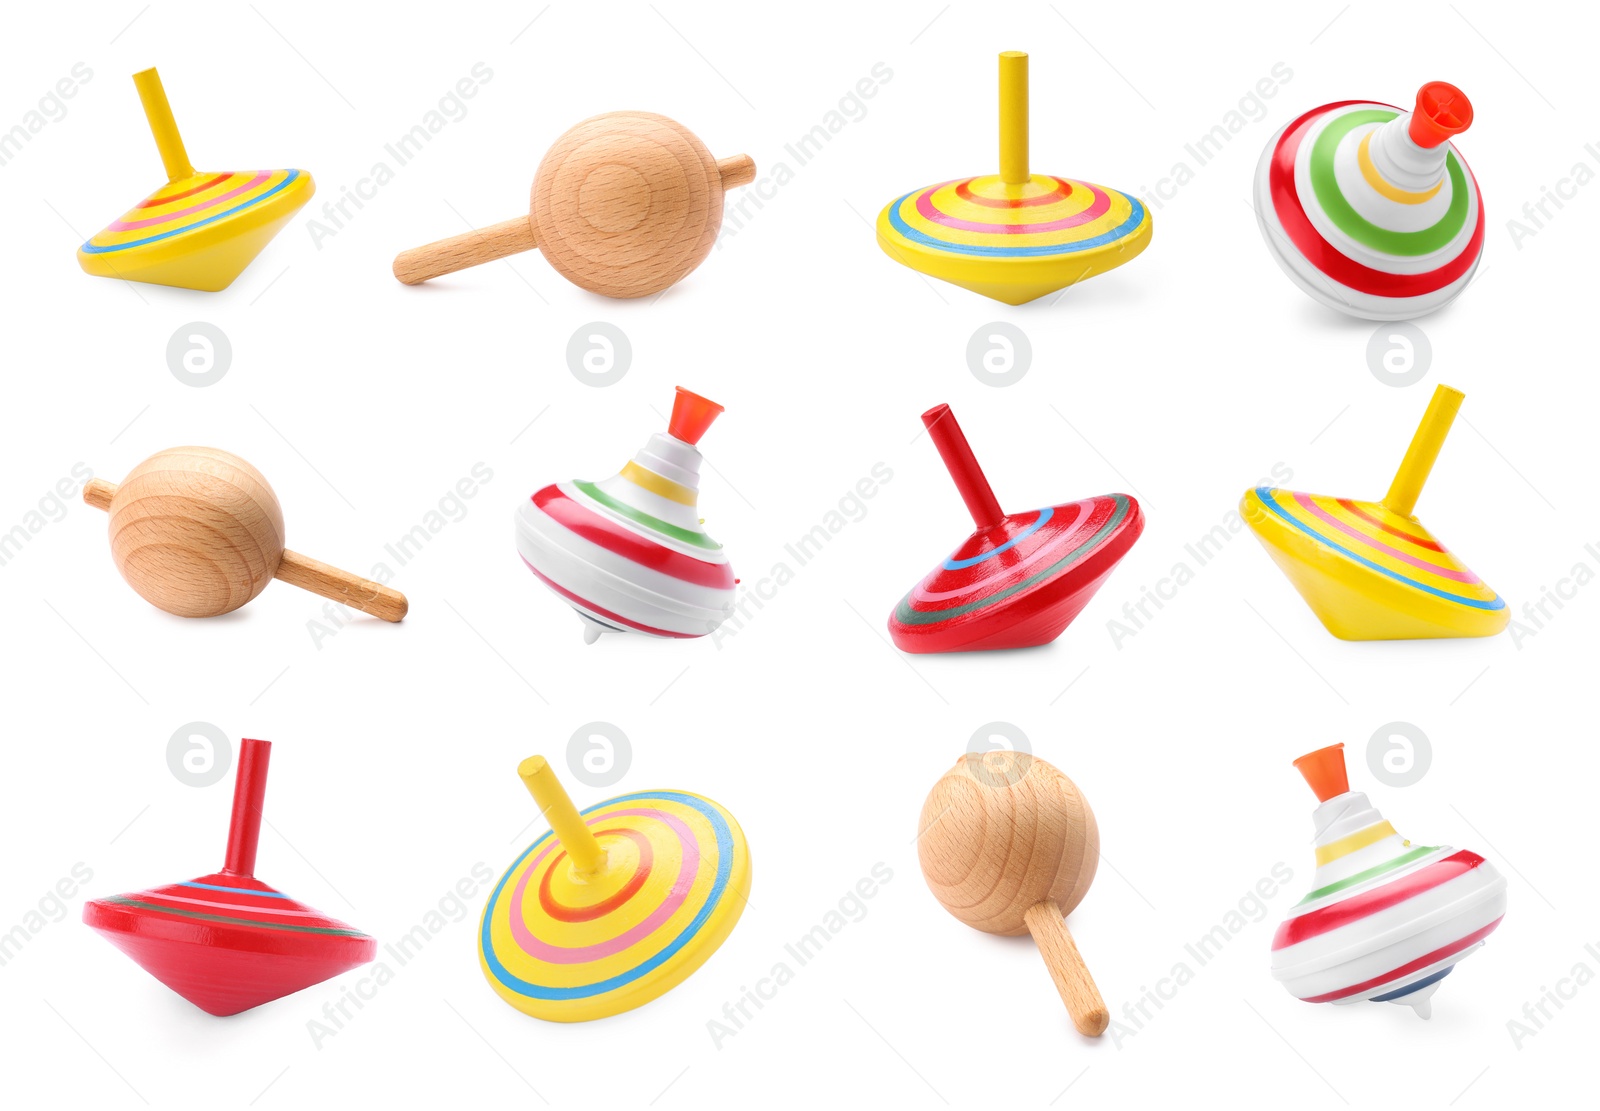 Image of Different spinning tops isolated on white. Toy whirligig